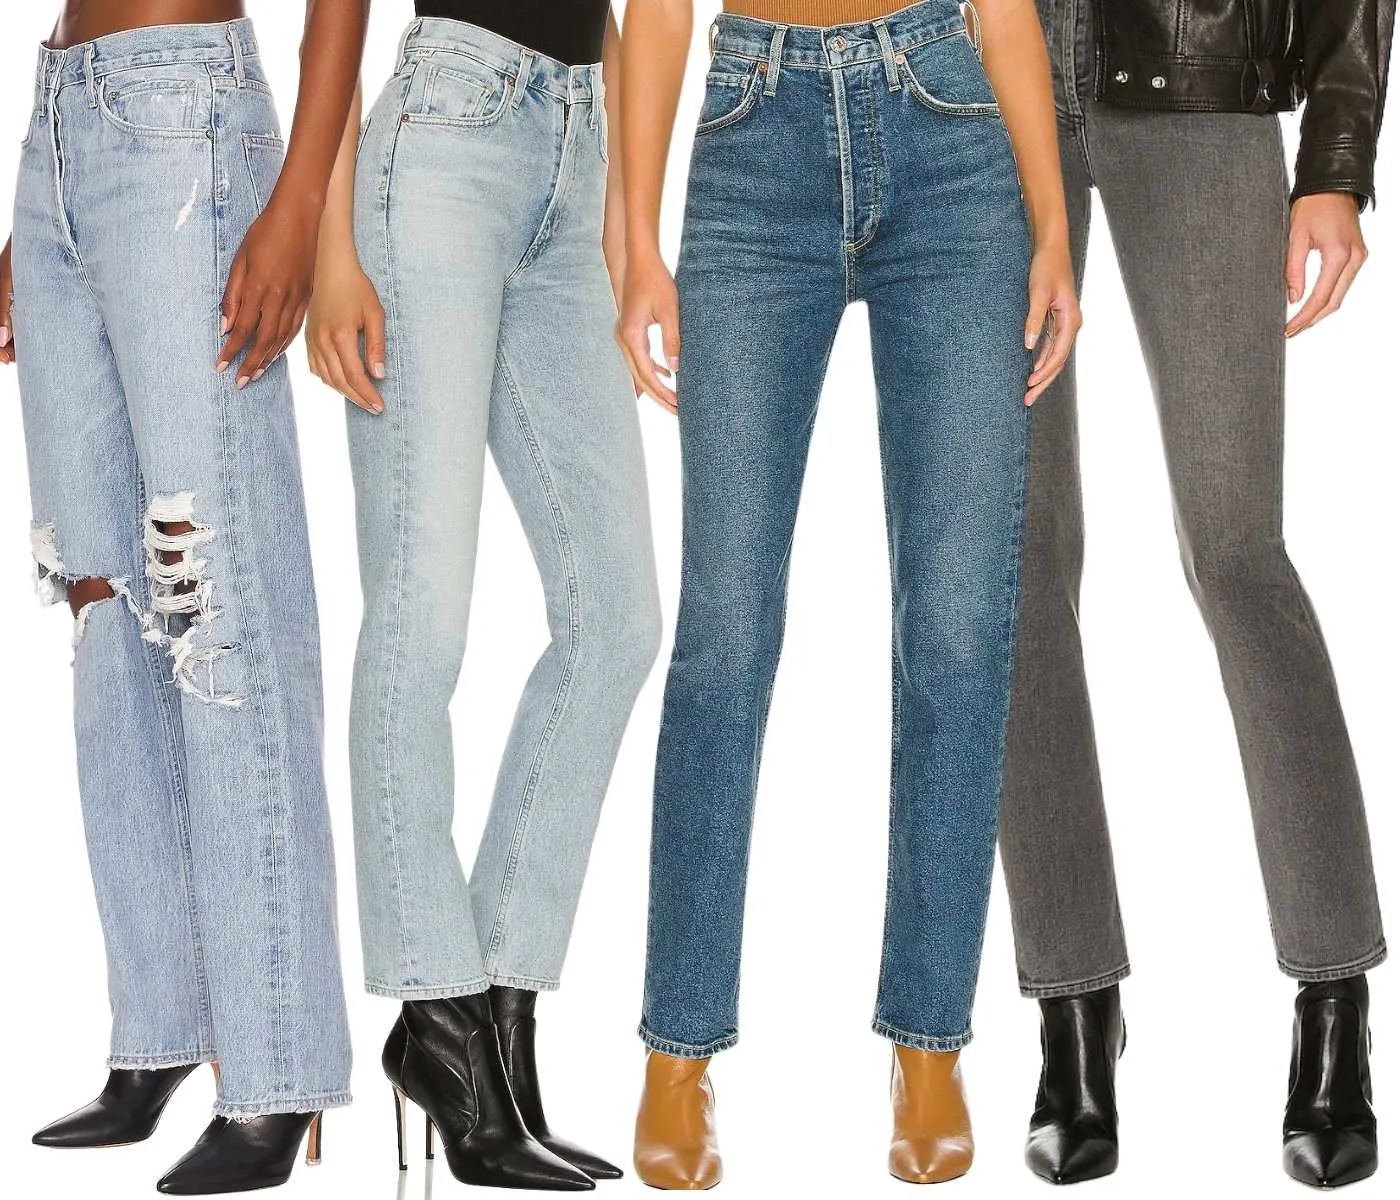 Collage of cropped view of 4 women's legs wearing different ankle boots with straight leg jeans.